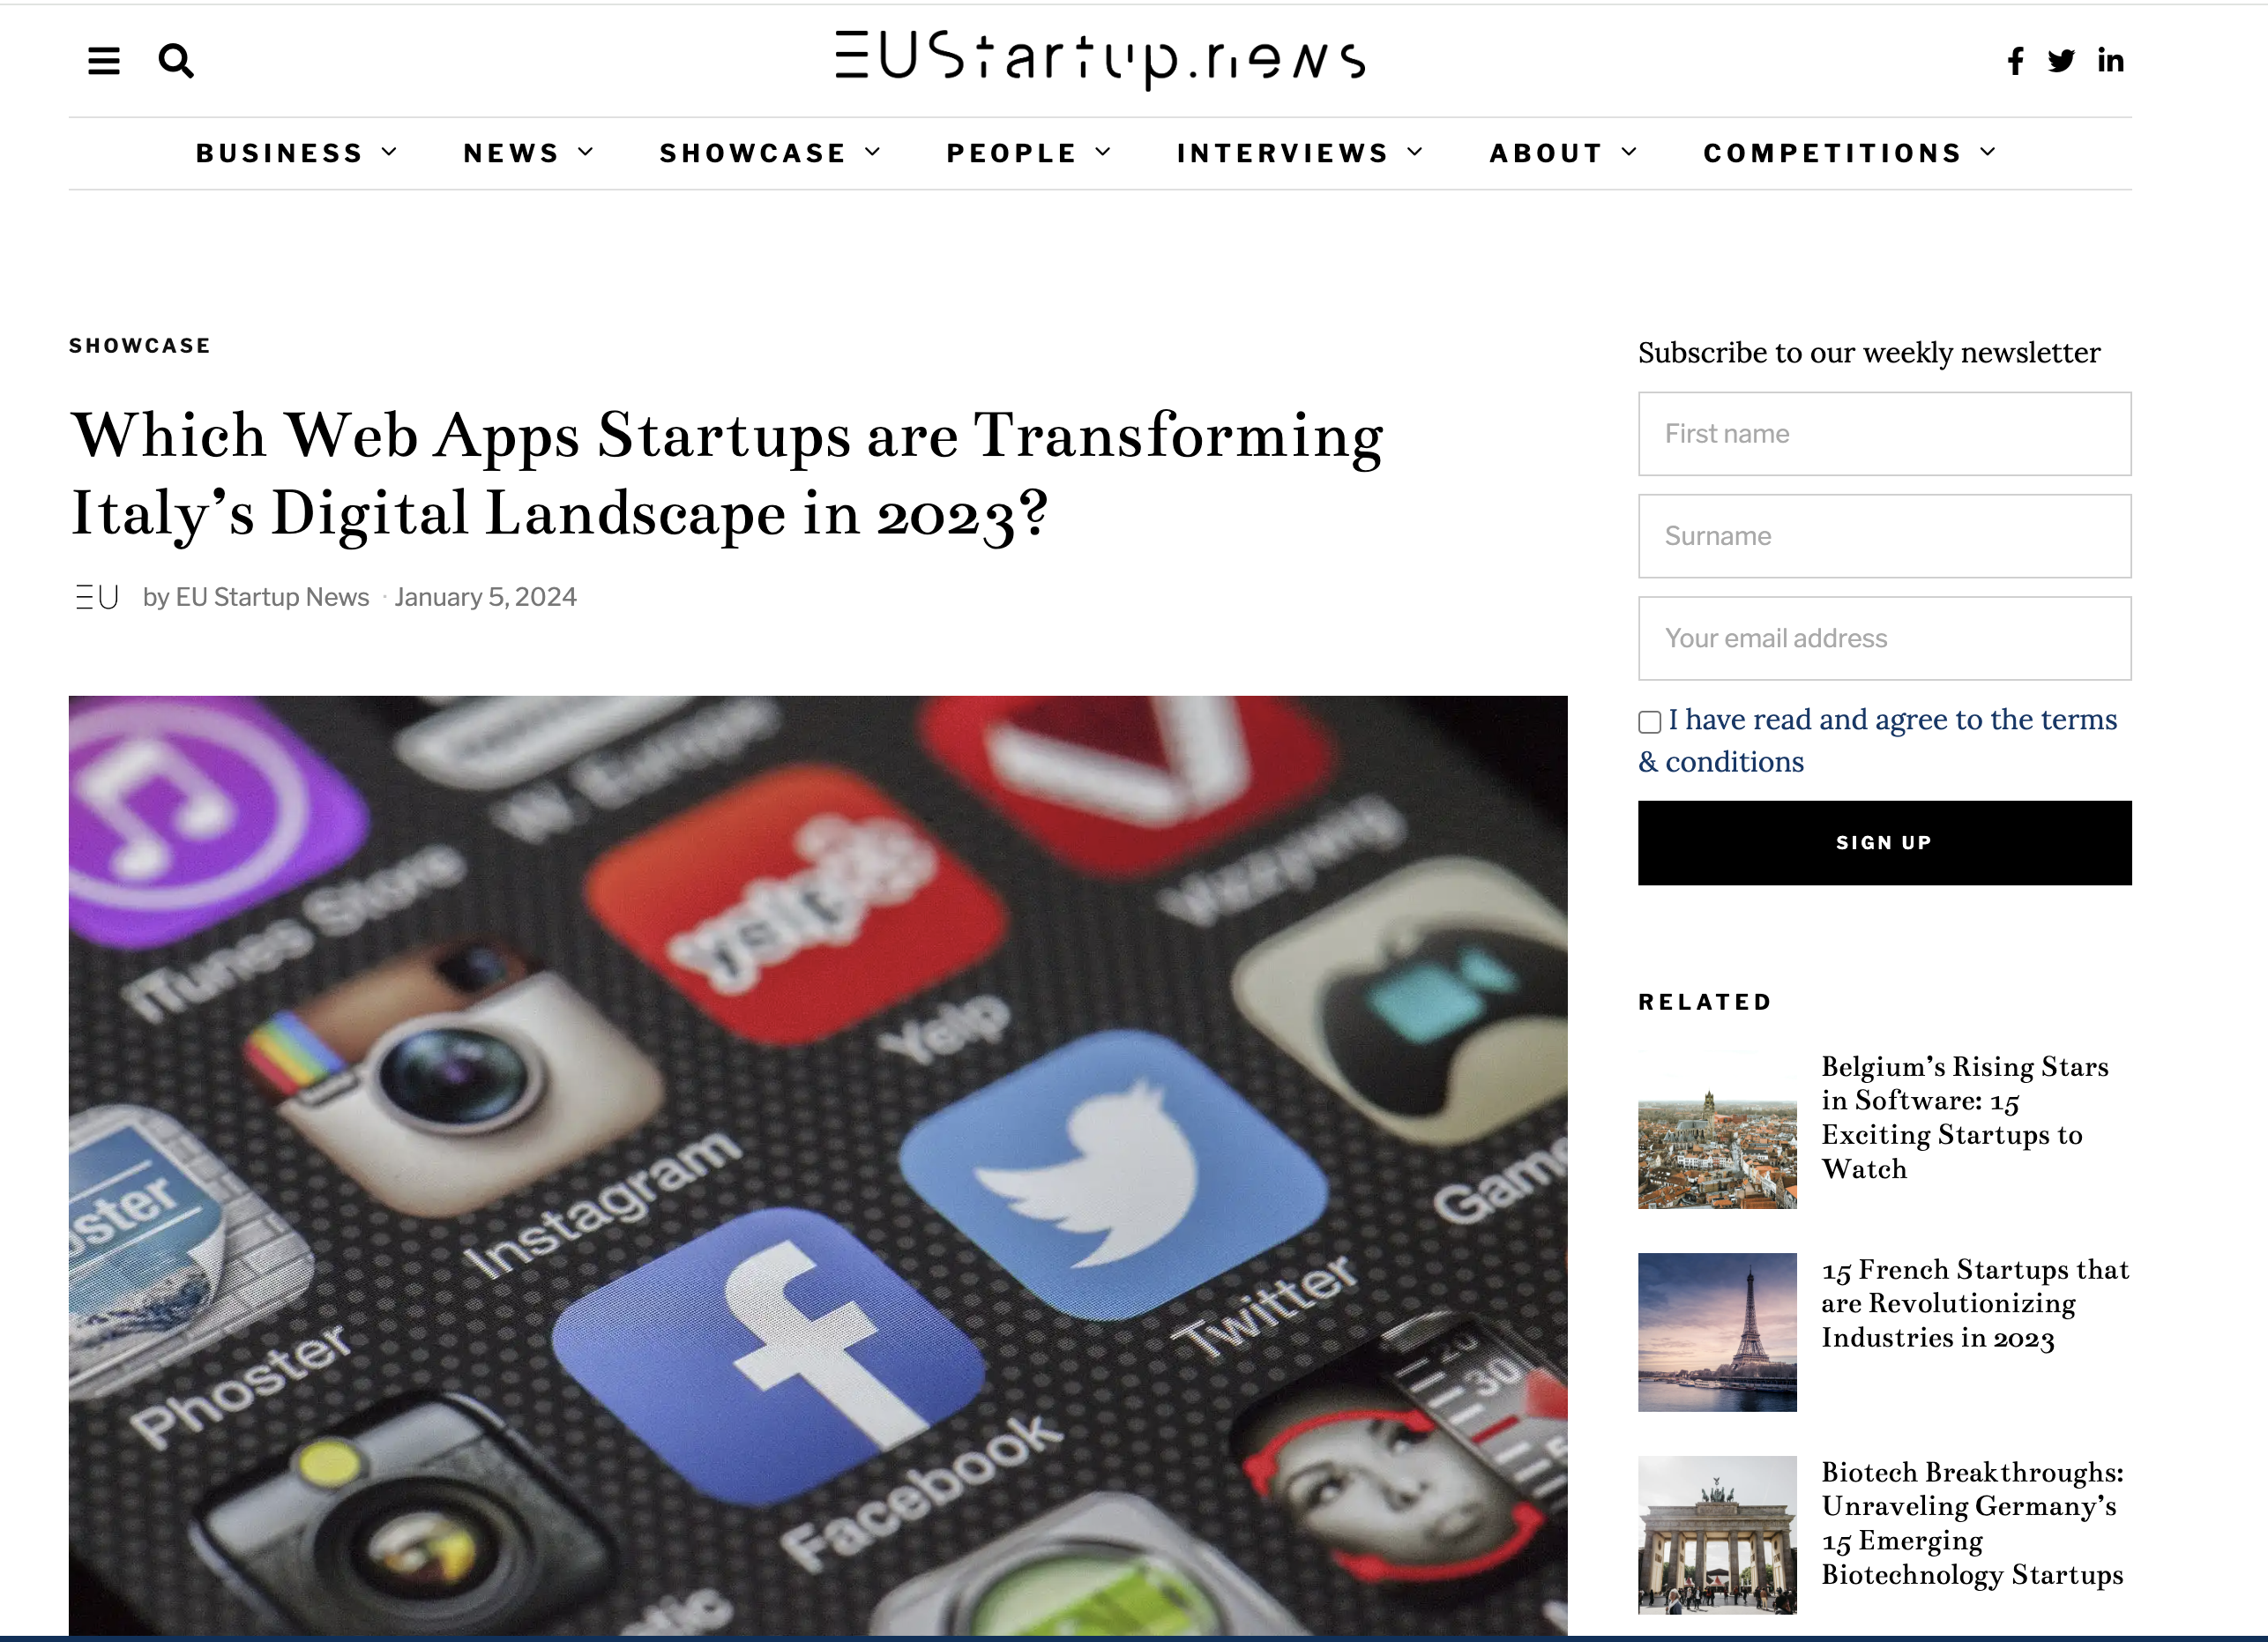 Which Web Apps Startups are Transforming Italy’s Digital Landscape in 2023?